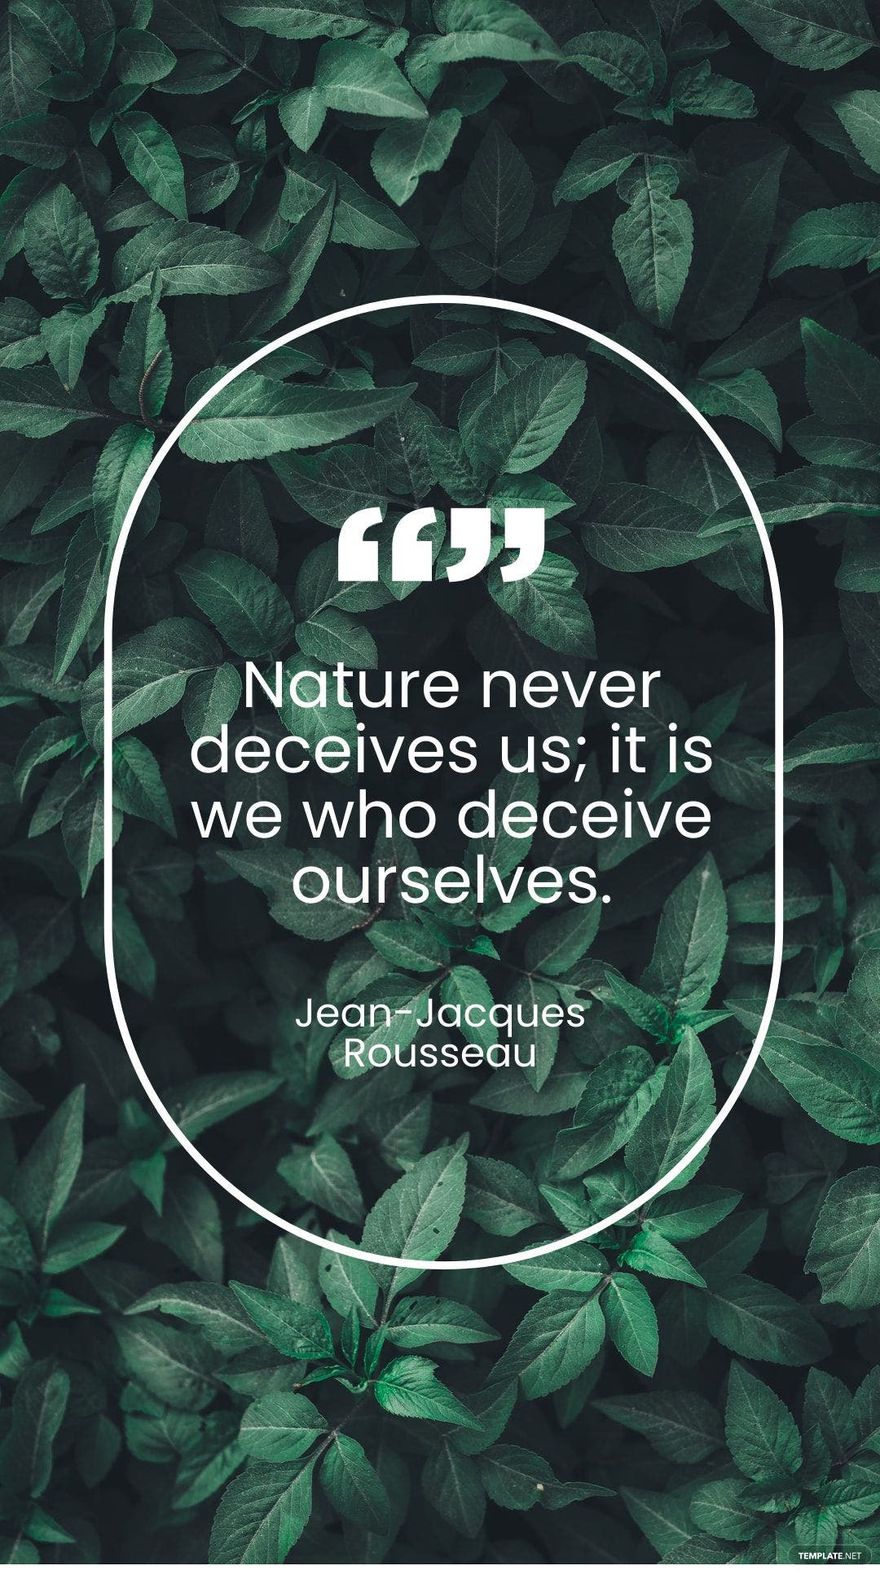 Free Jean-Jacques Rousseau - Nature never deceives us; it is we who deceive ourselves. in JPG